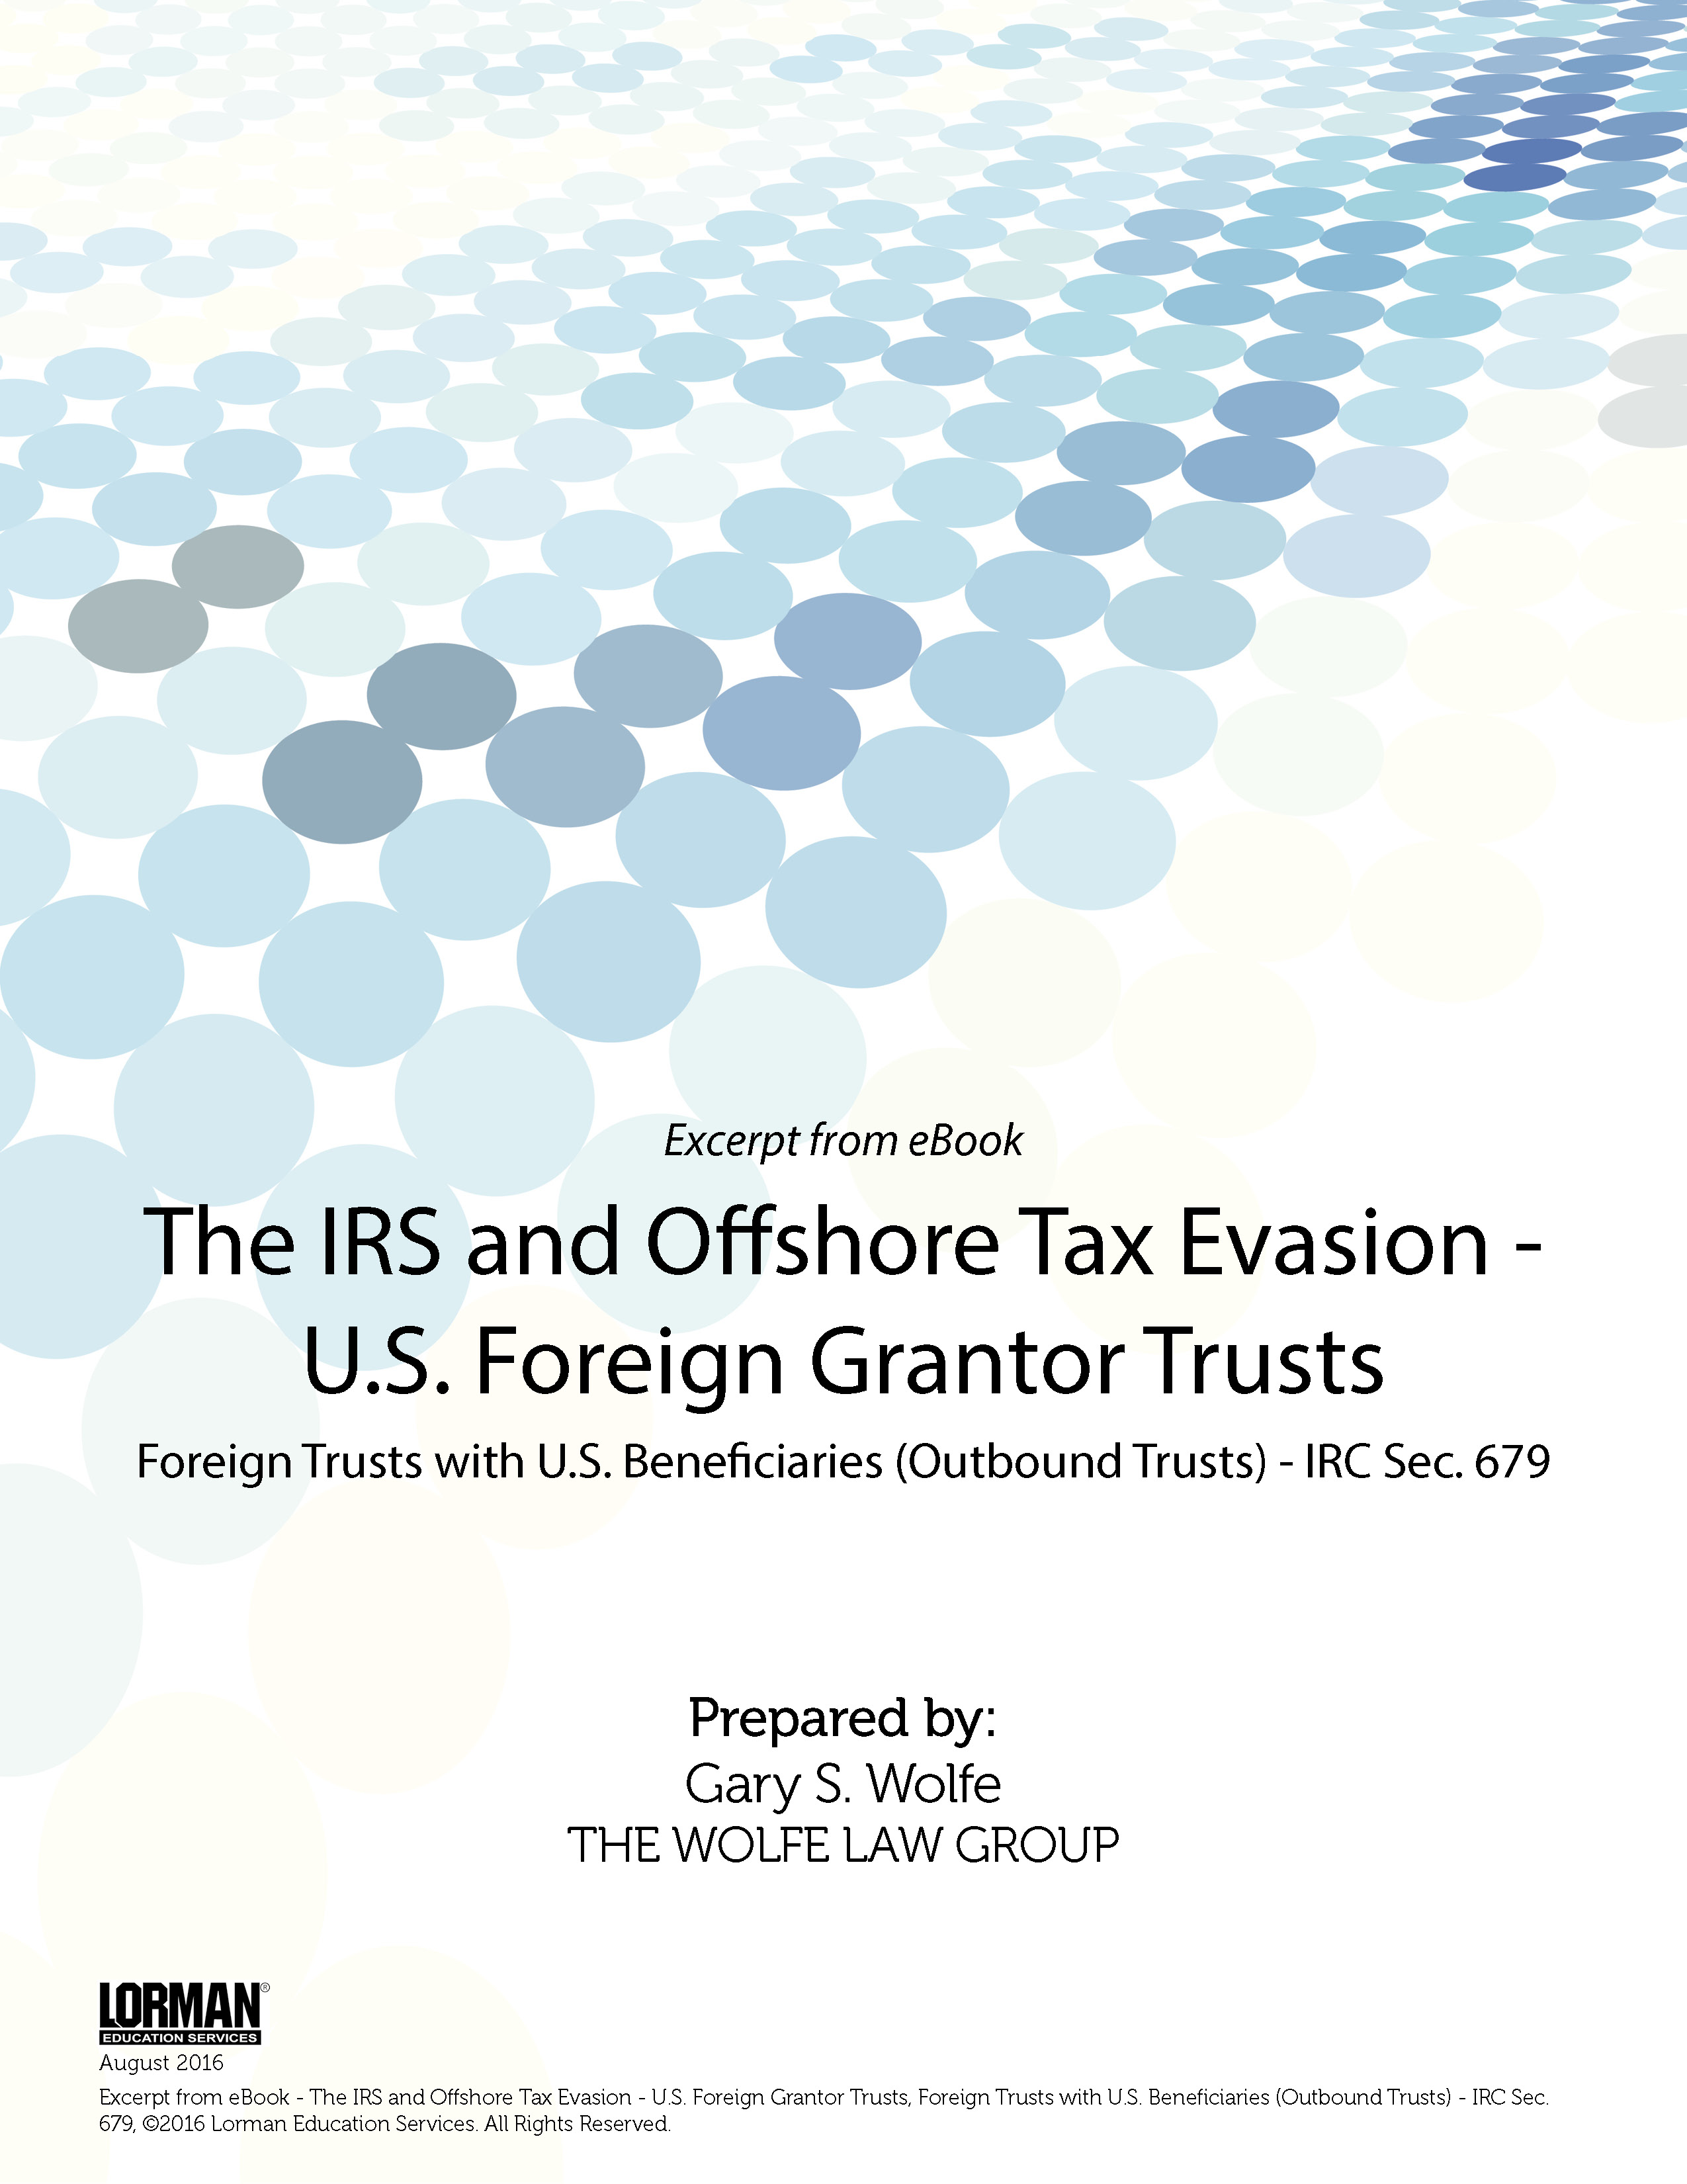 The IRS and Offshore Tax Evasion - U.S. Foreign Grantor Trusts